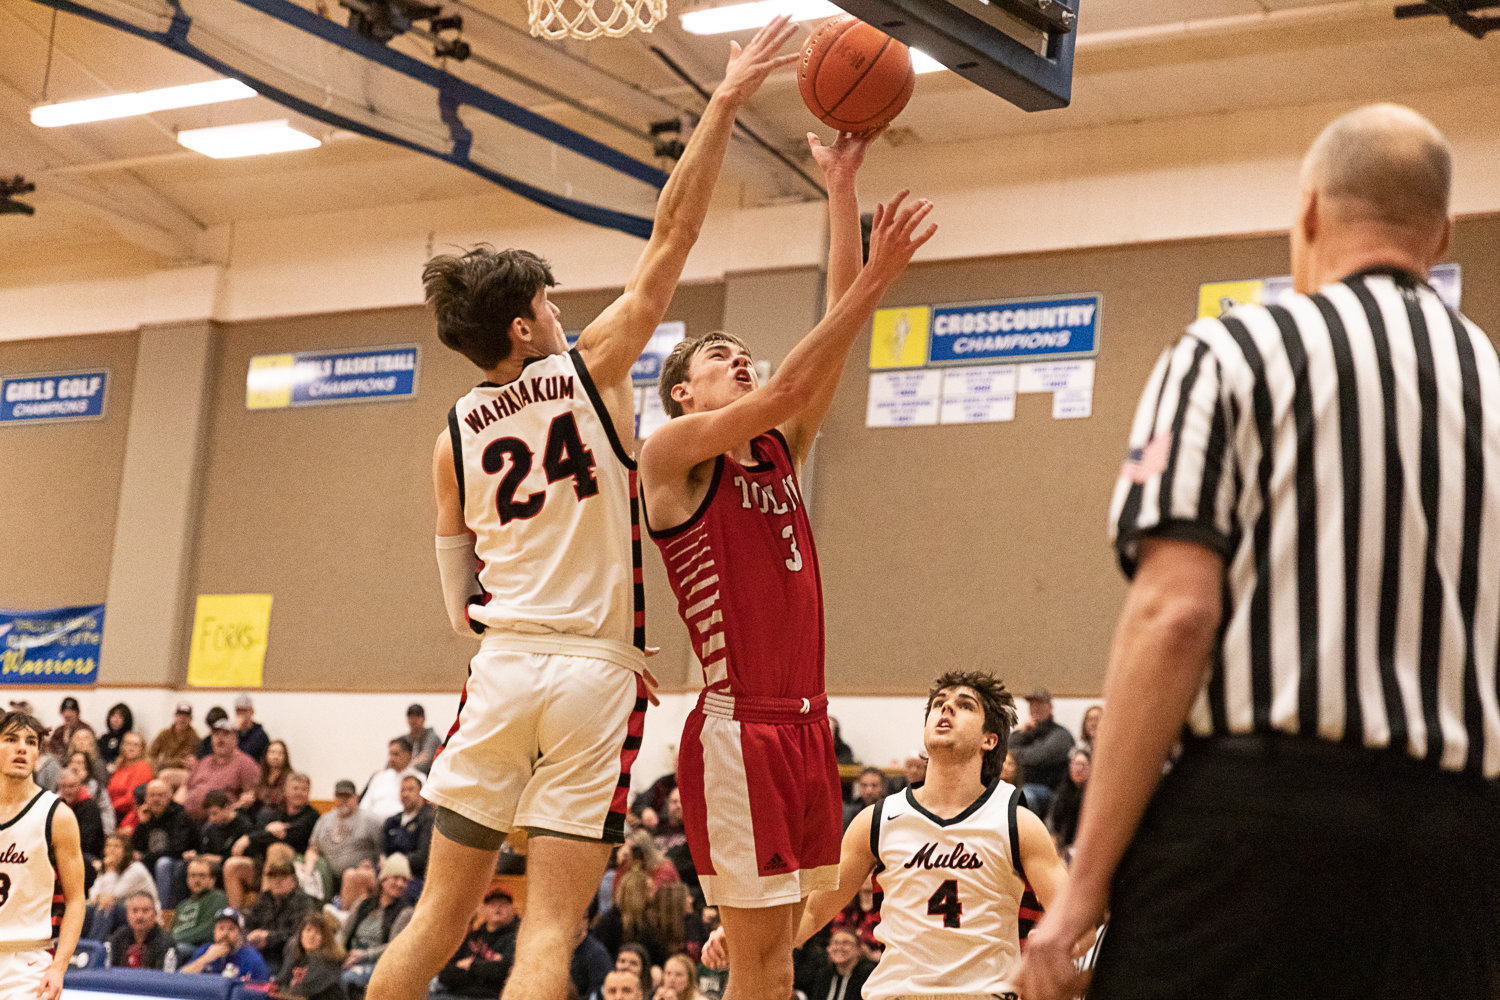 Toledo guard Rogan Stanley gets his shot blocked by Wahkiakum's Kyler Sause in the first round of the 2B District 4 tournament Feb. 4 at Rochester.